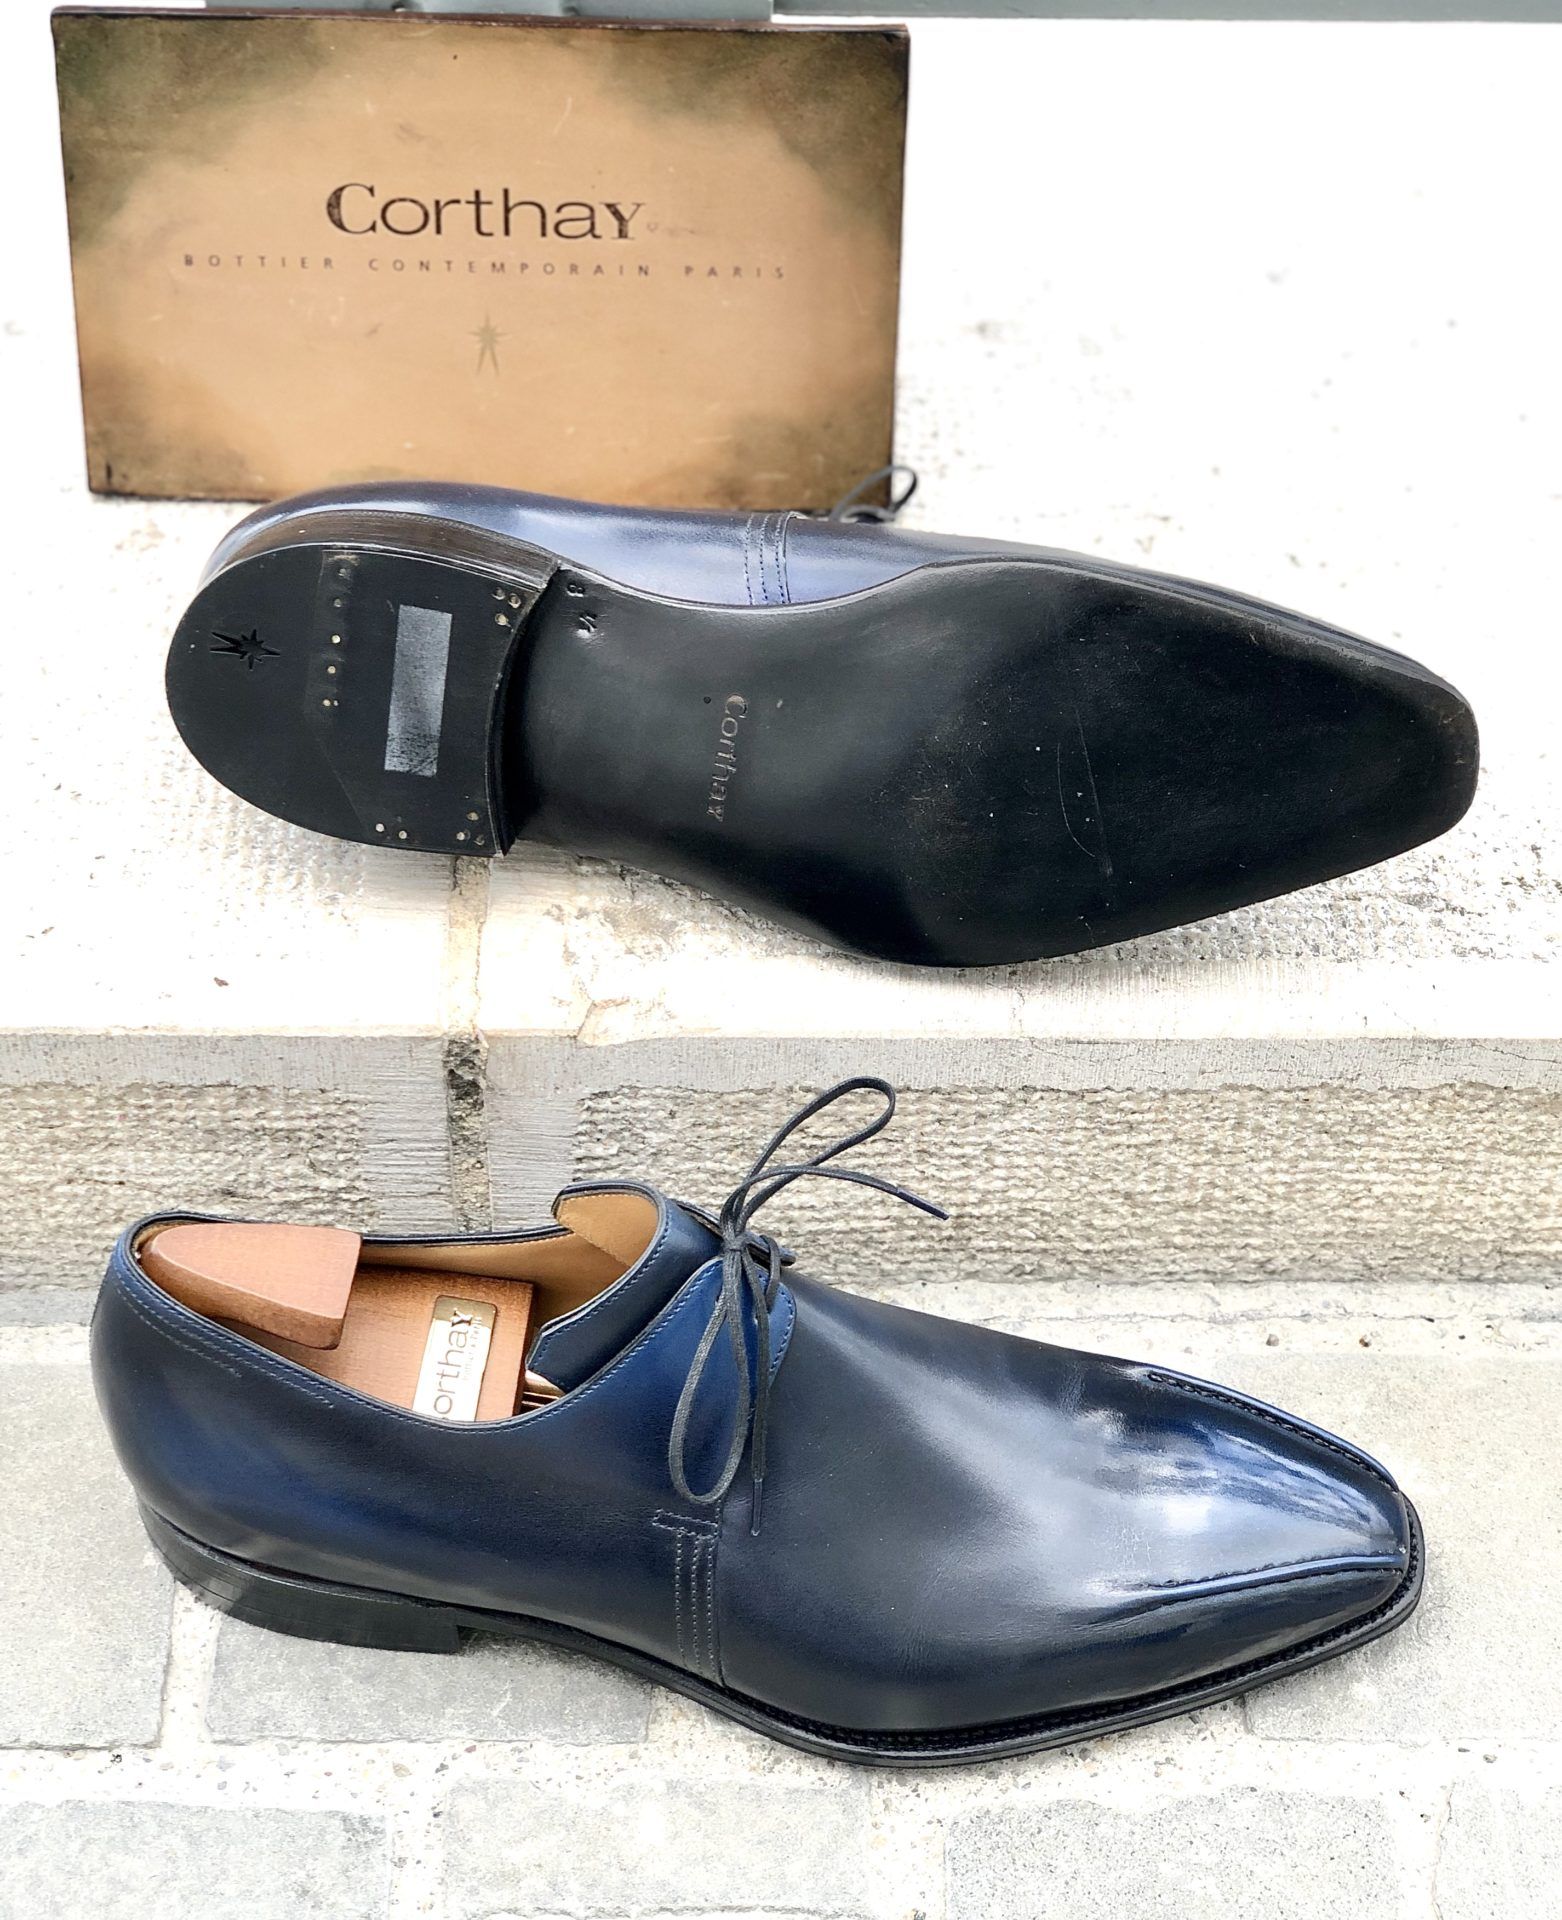 corthay shoes sale